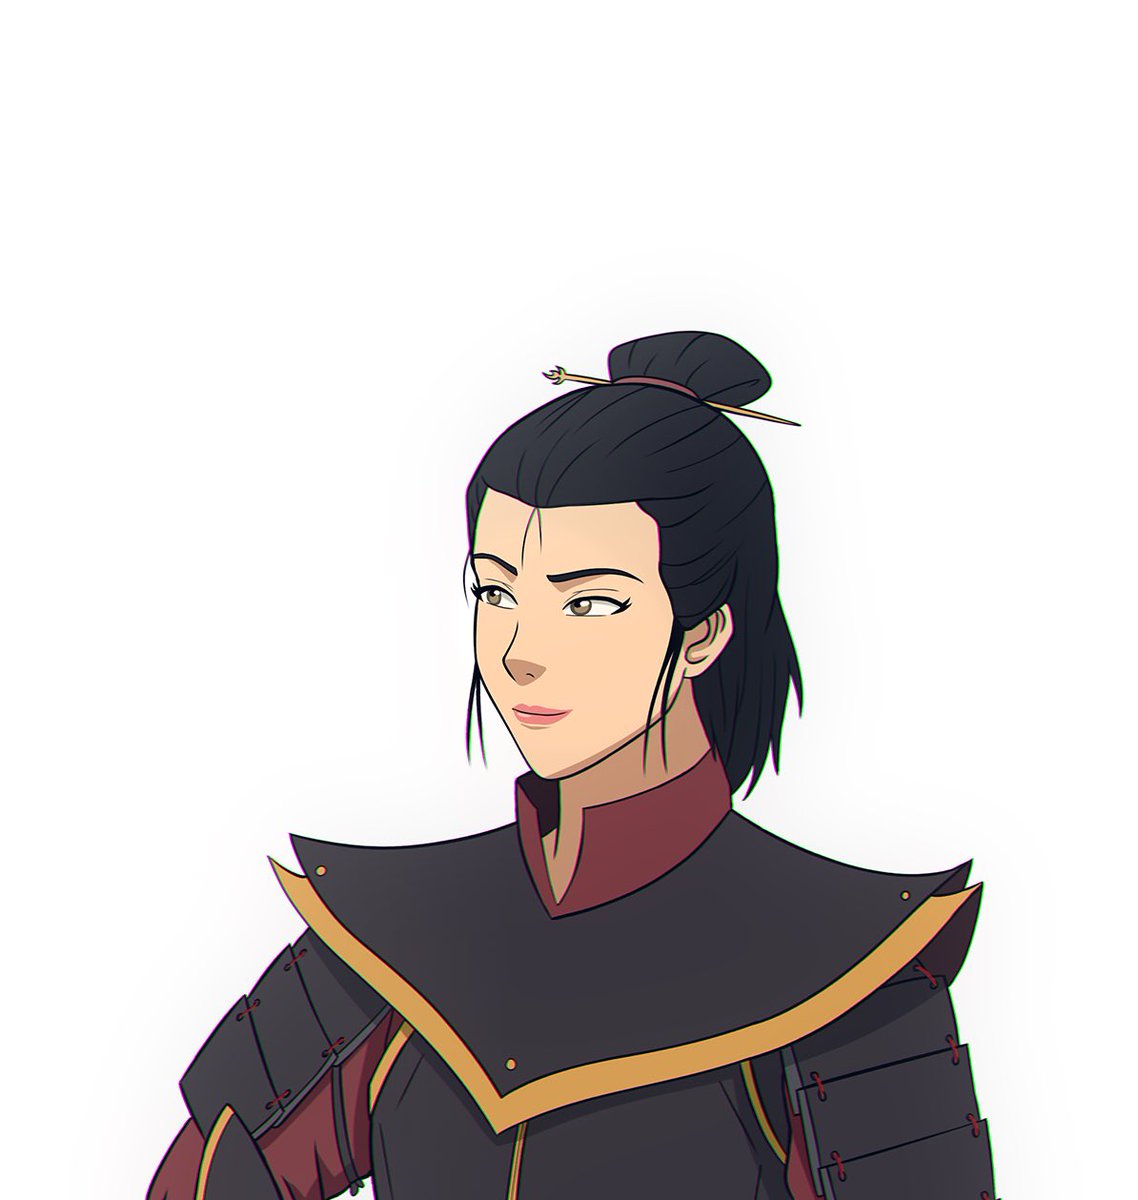 Avatar Kyoshi looks like ummi if not a little older. Which bring us to kyoshis girlfriend rangi besides being exceptionally beautiful she looks like a you g avatar roku